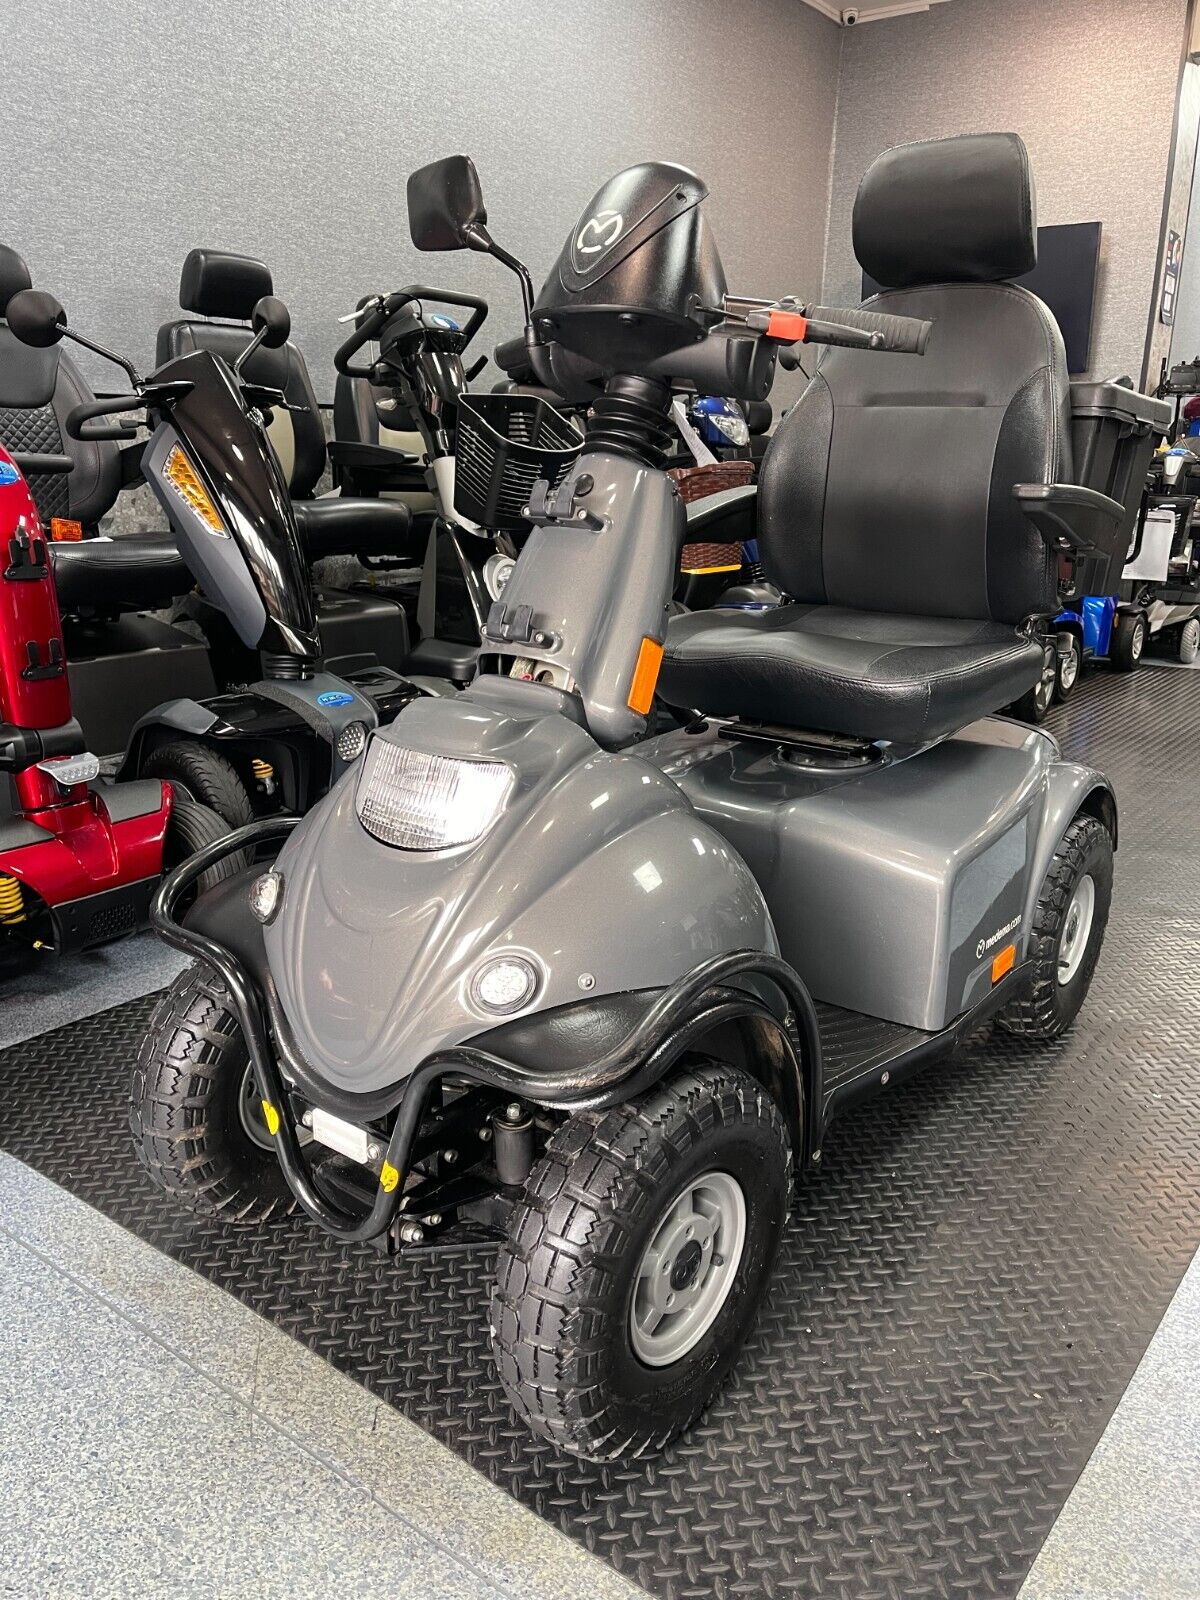 MADEMA MINI CROSSER M2 8MPH ROAD LEGAL MOBILITY SCOOTER LARGE BUGGY 150 MILES